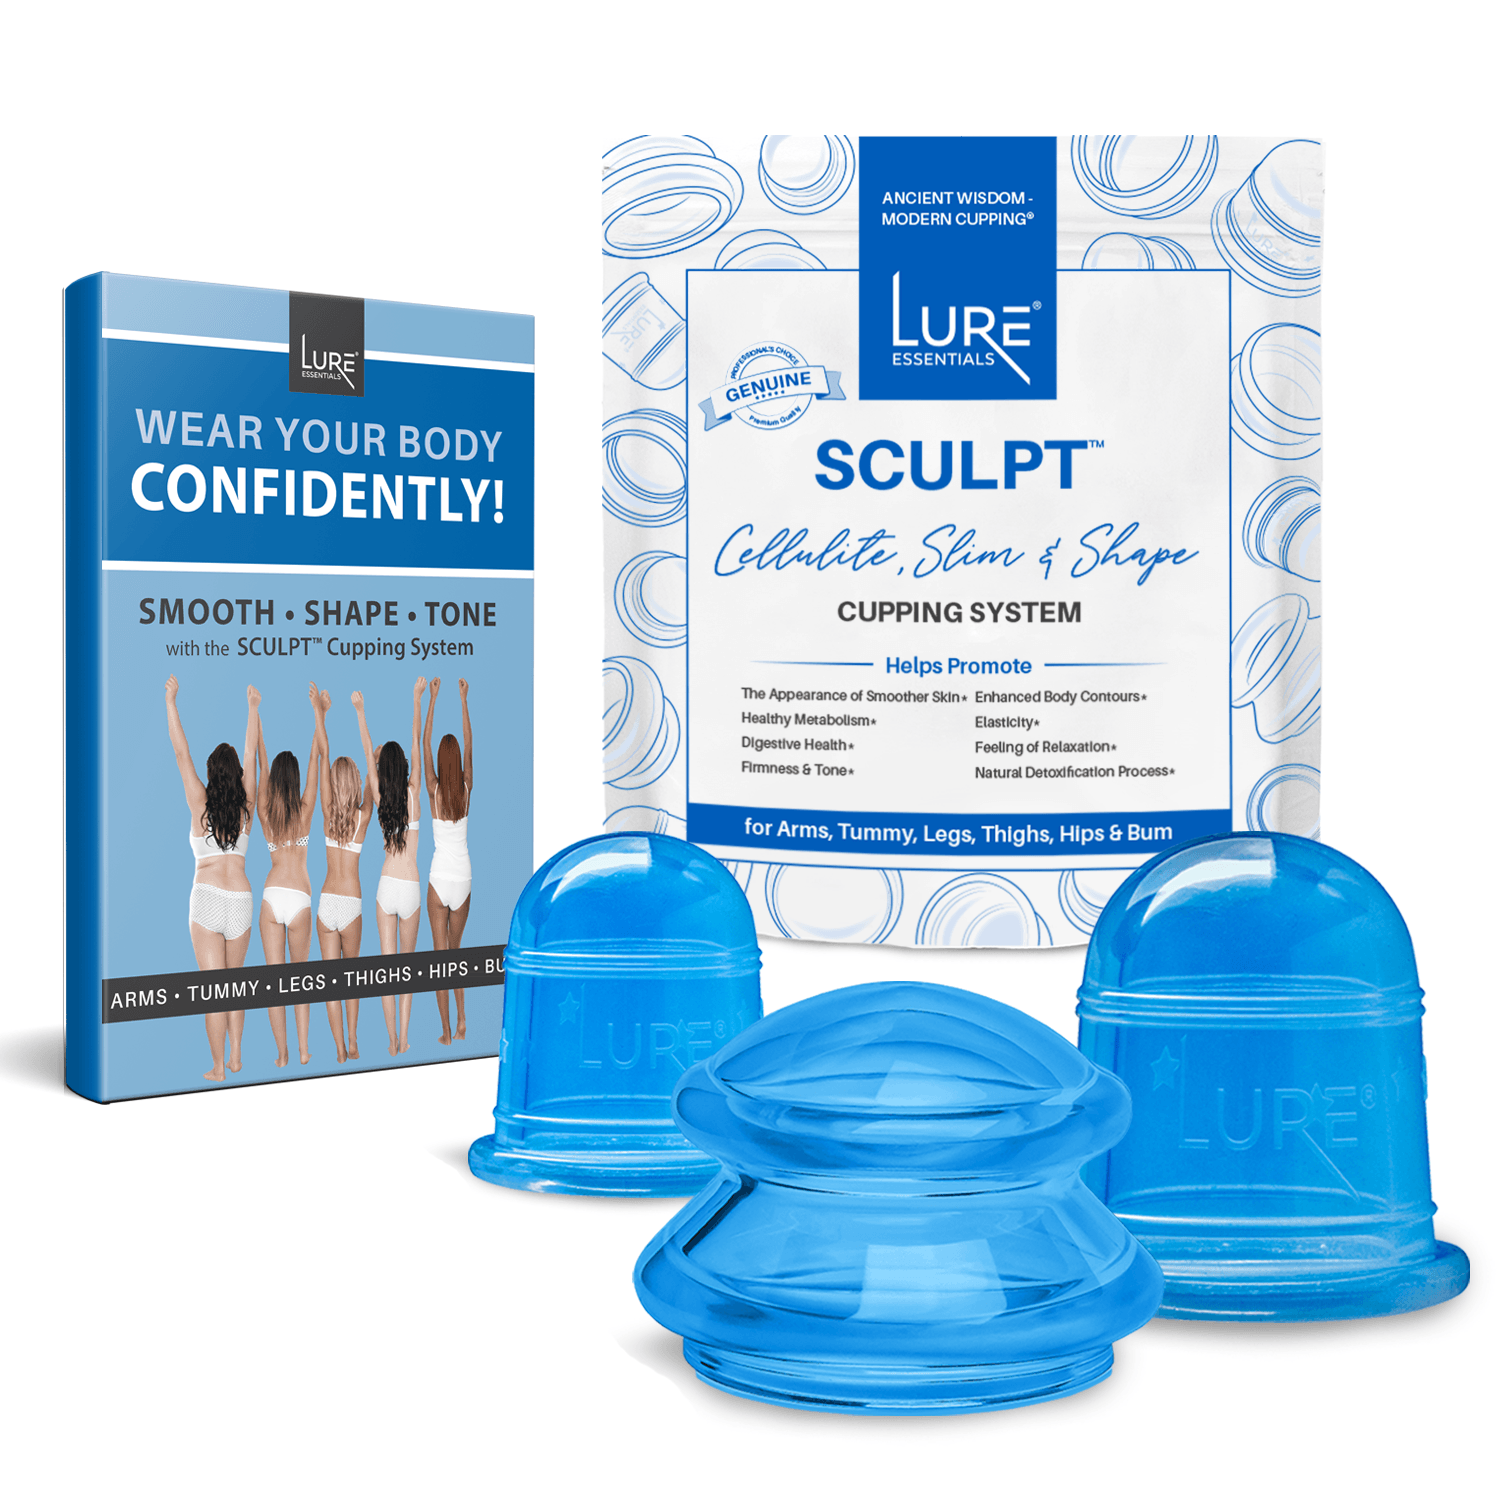 SCULPT Cellulite and Body Firming Cupping Set